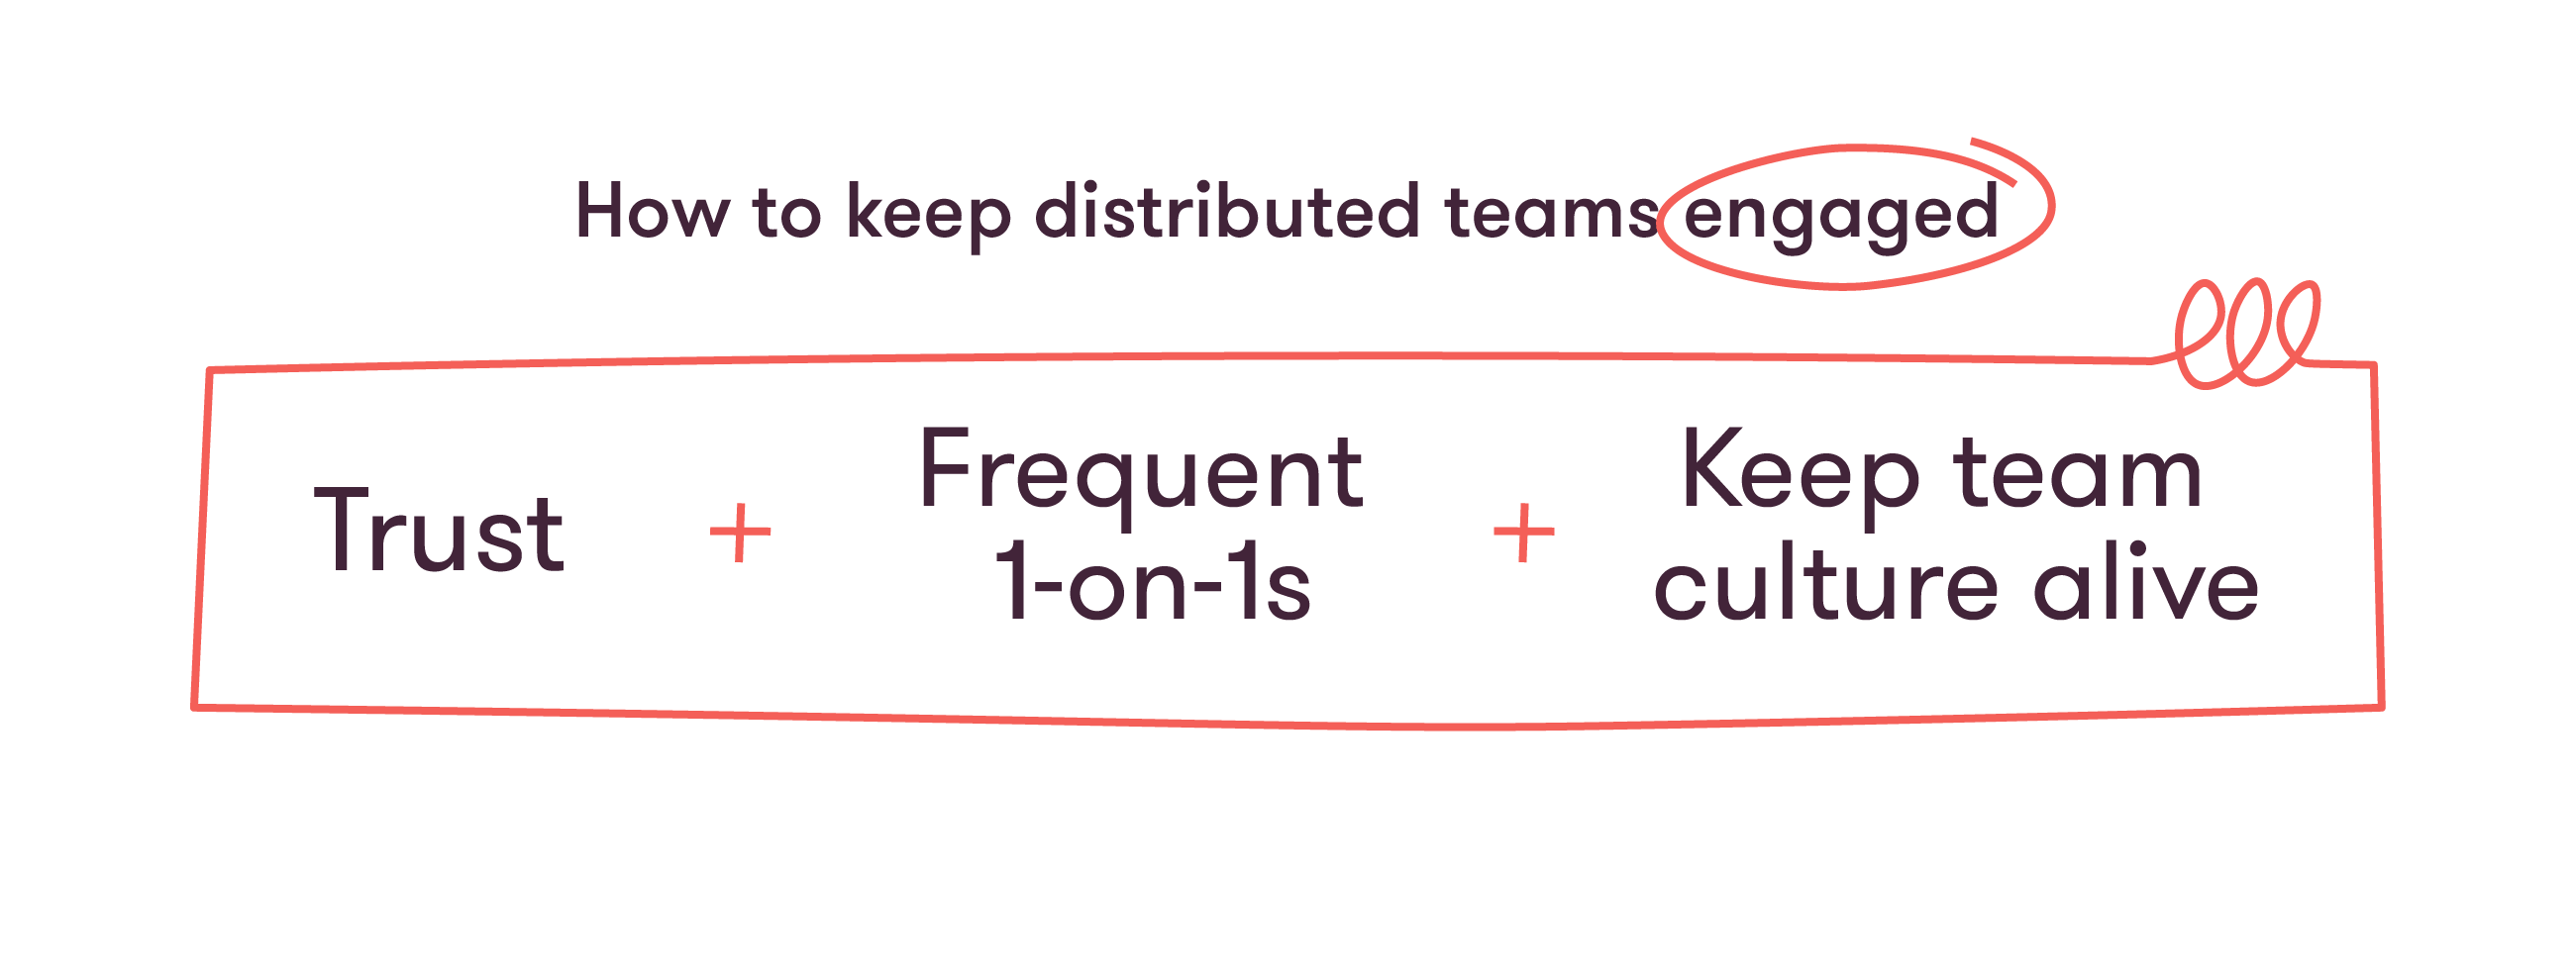 Formula to keep distributed teams engaged = trust + frequent 1-on-1s + keep team culture alive